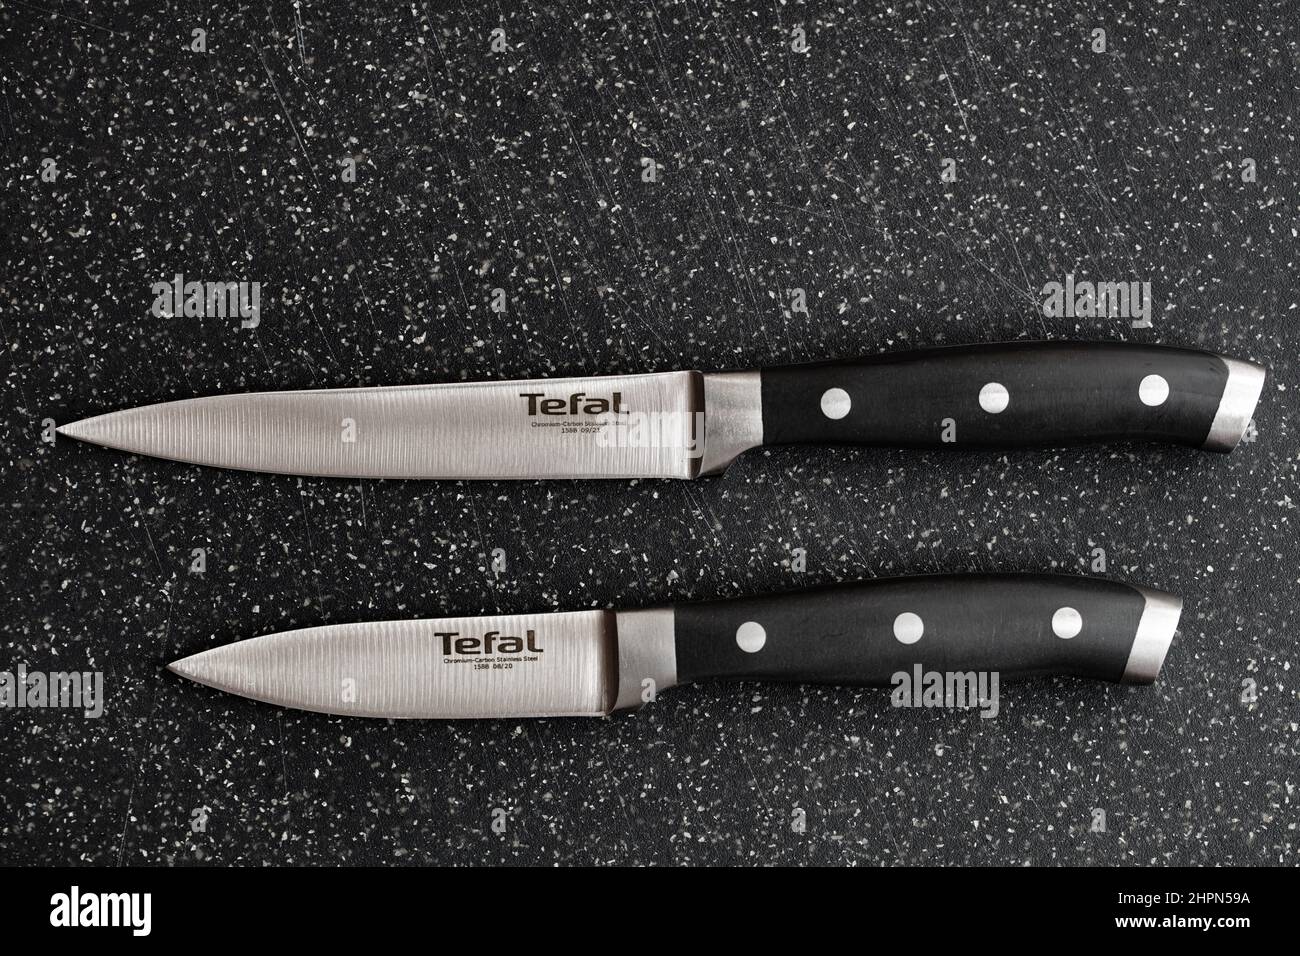 Rumilly, France - February 22, 2022: Tefal Character knife on board  background Stock Photo - Alamy